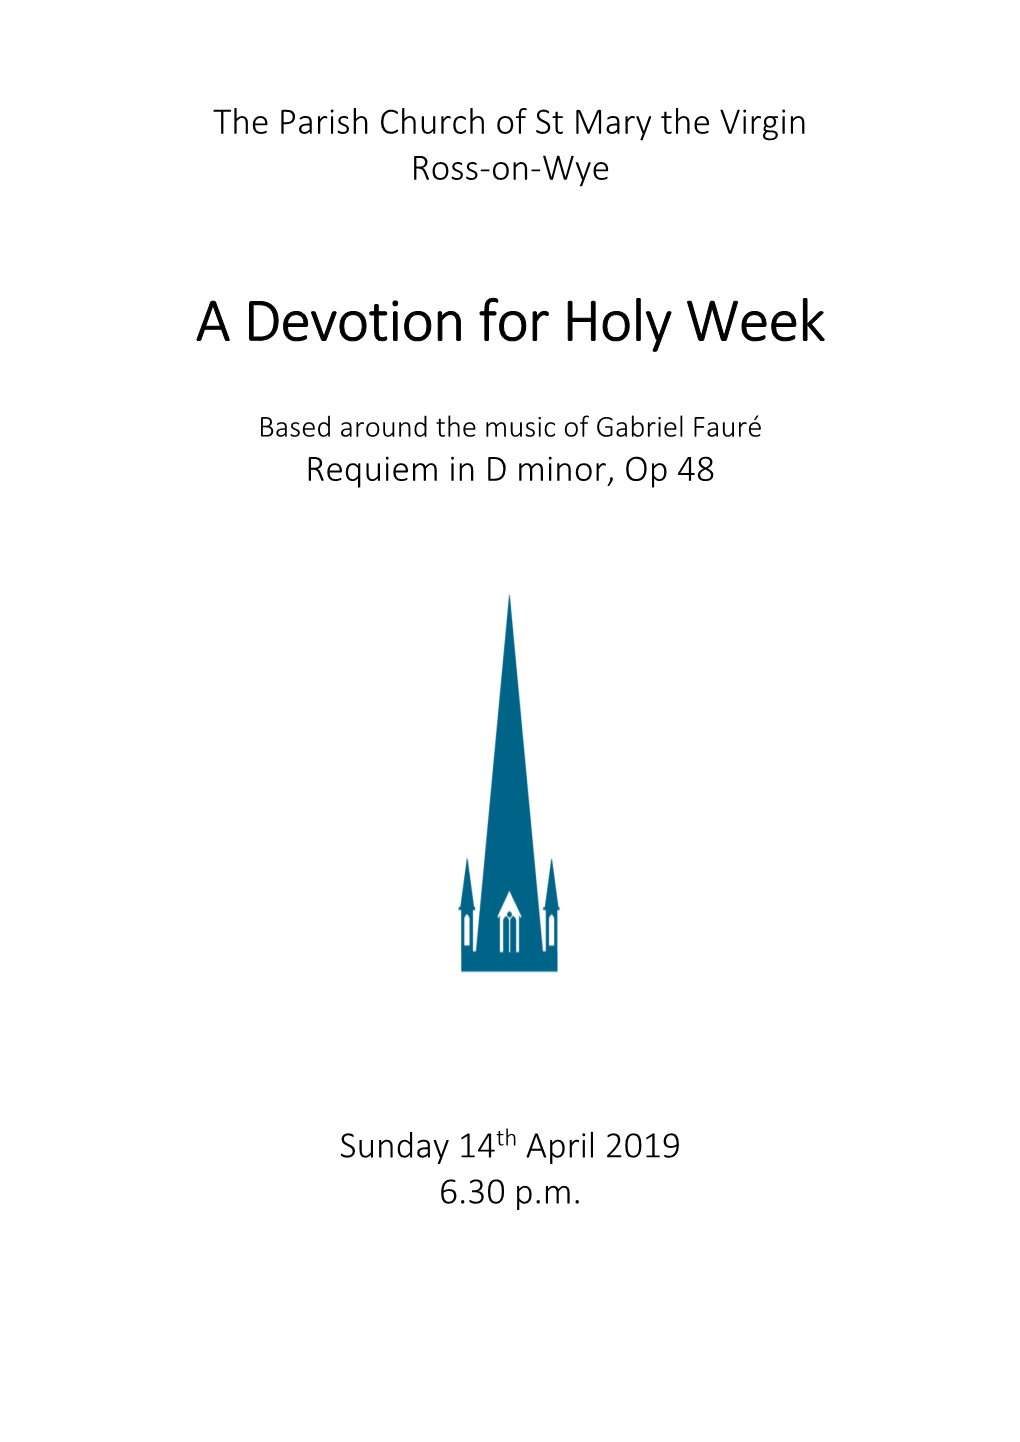 A Devotion for Holy Week